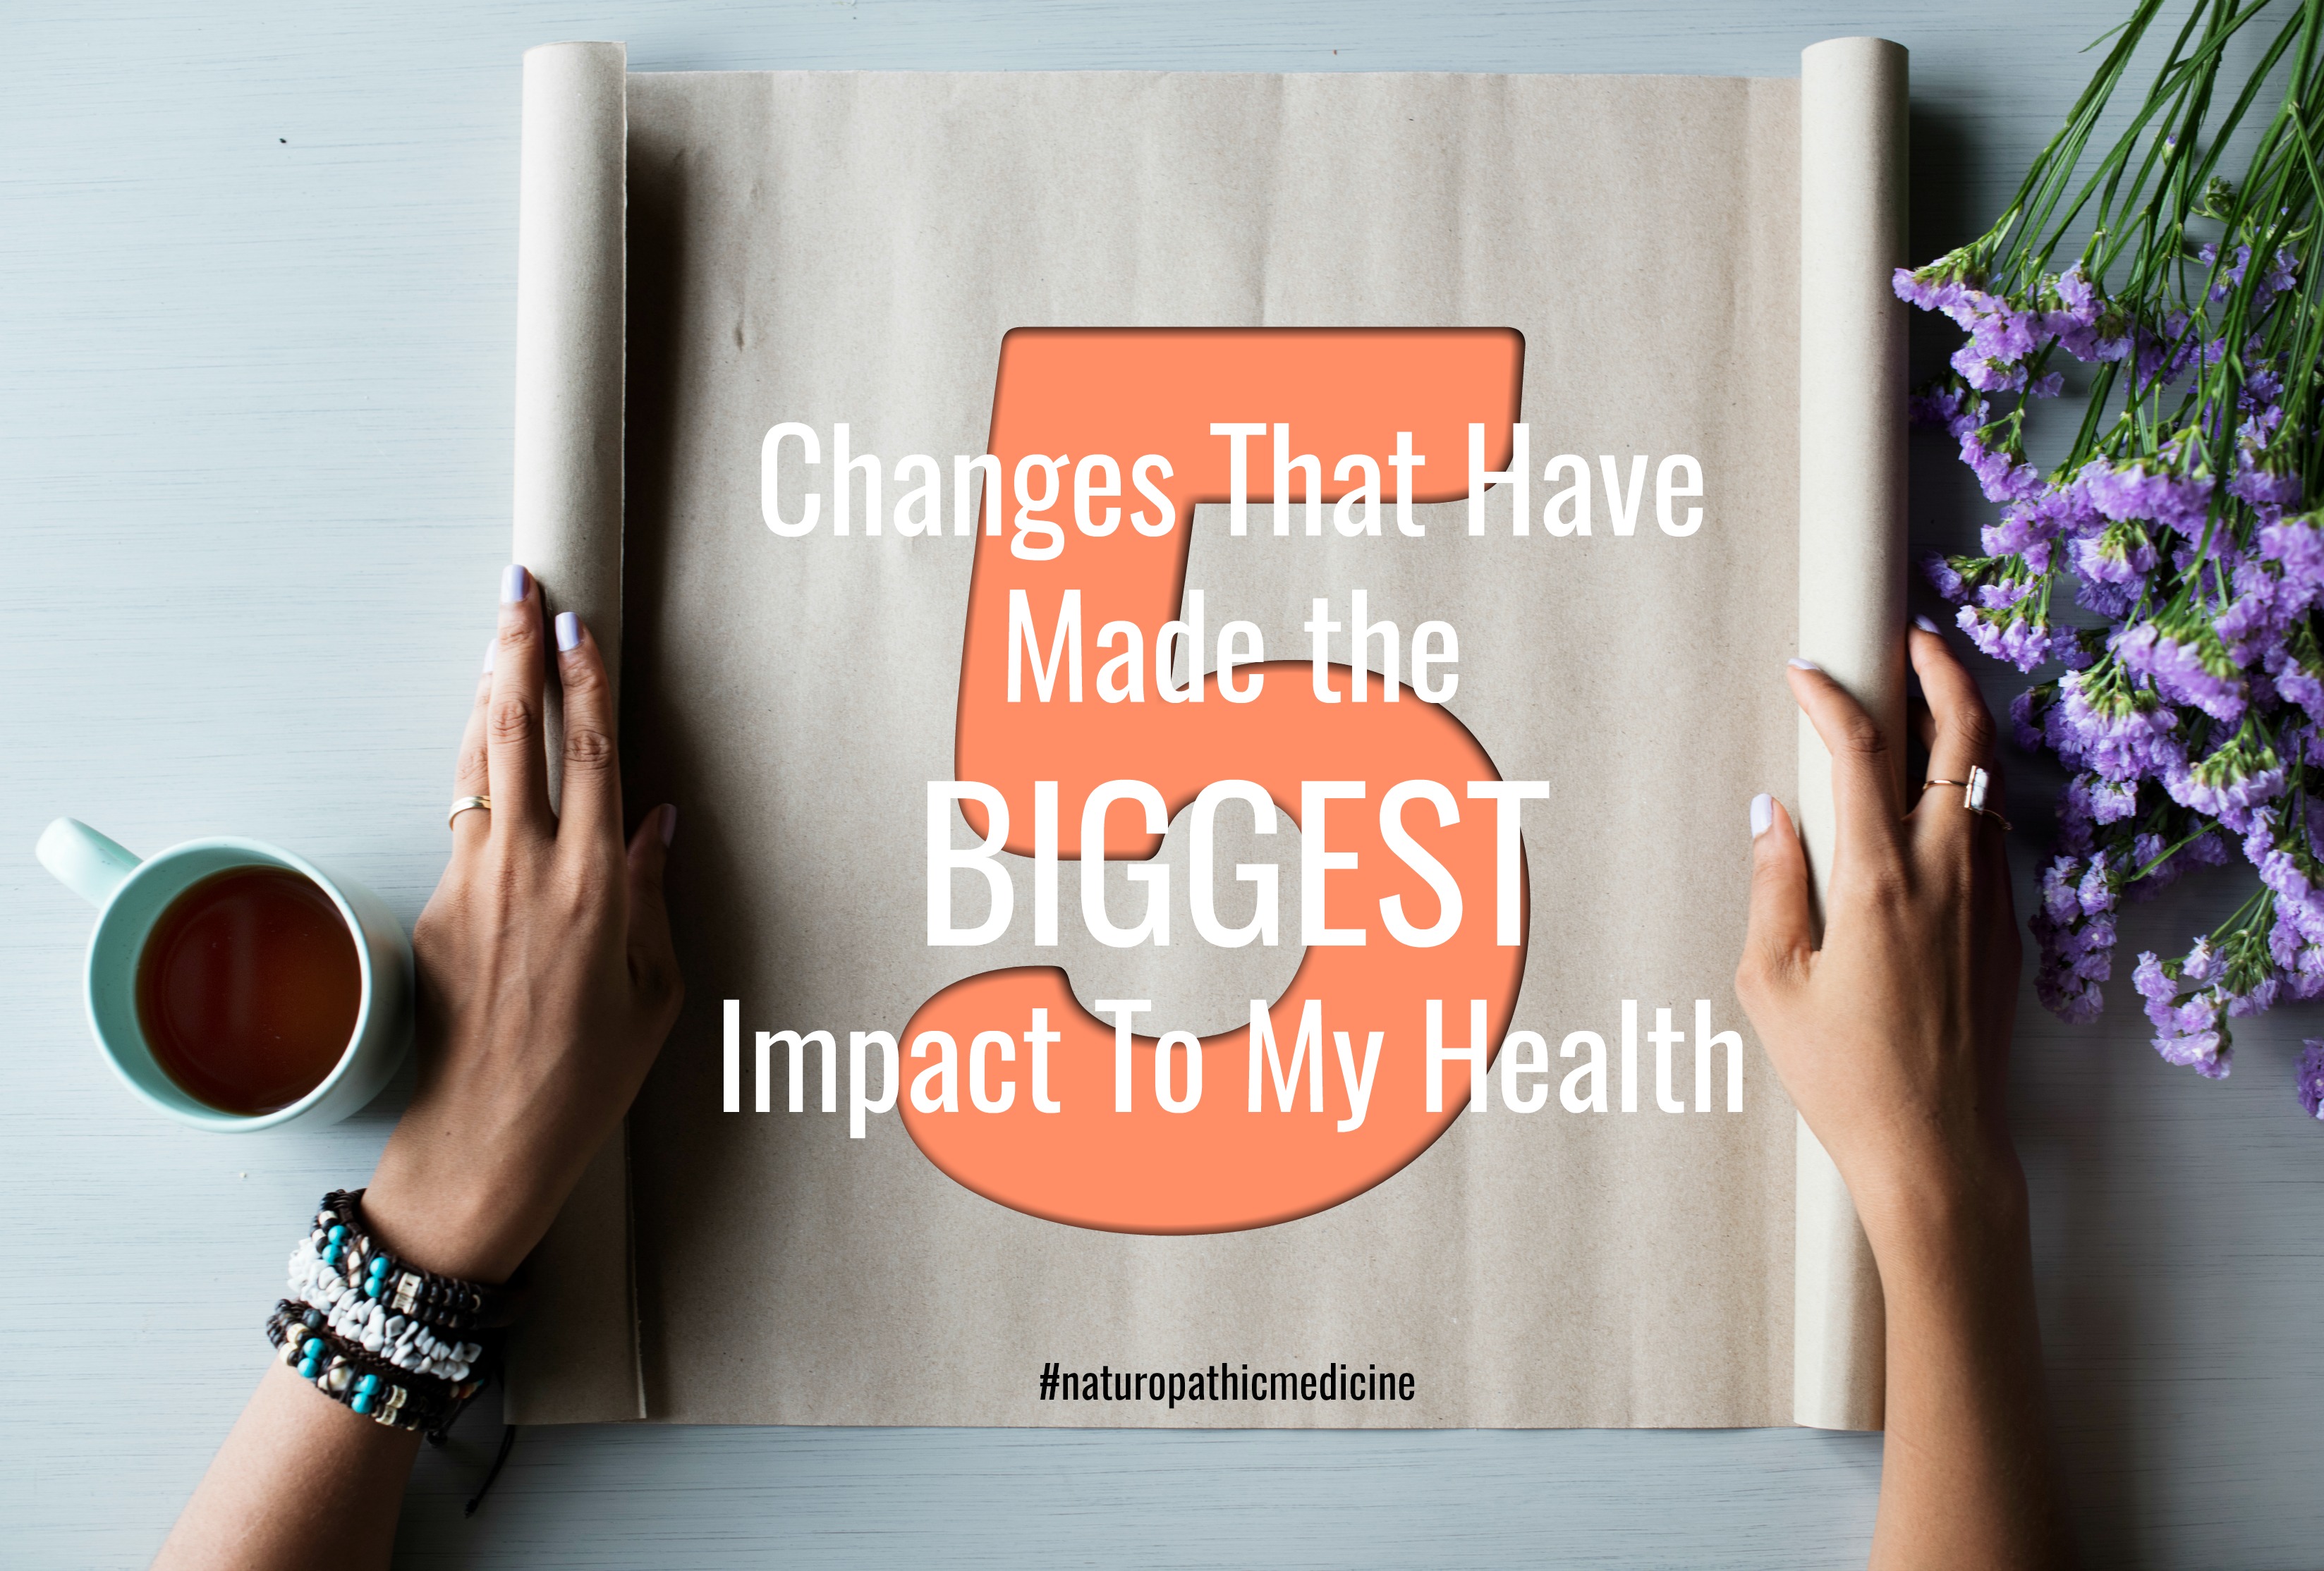 5 Changes That Have Made the BIGGEST Impact to my Health